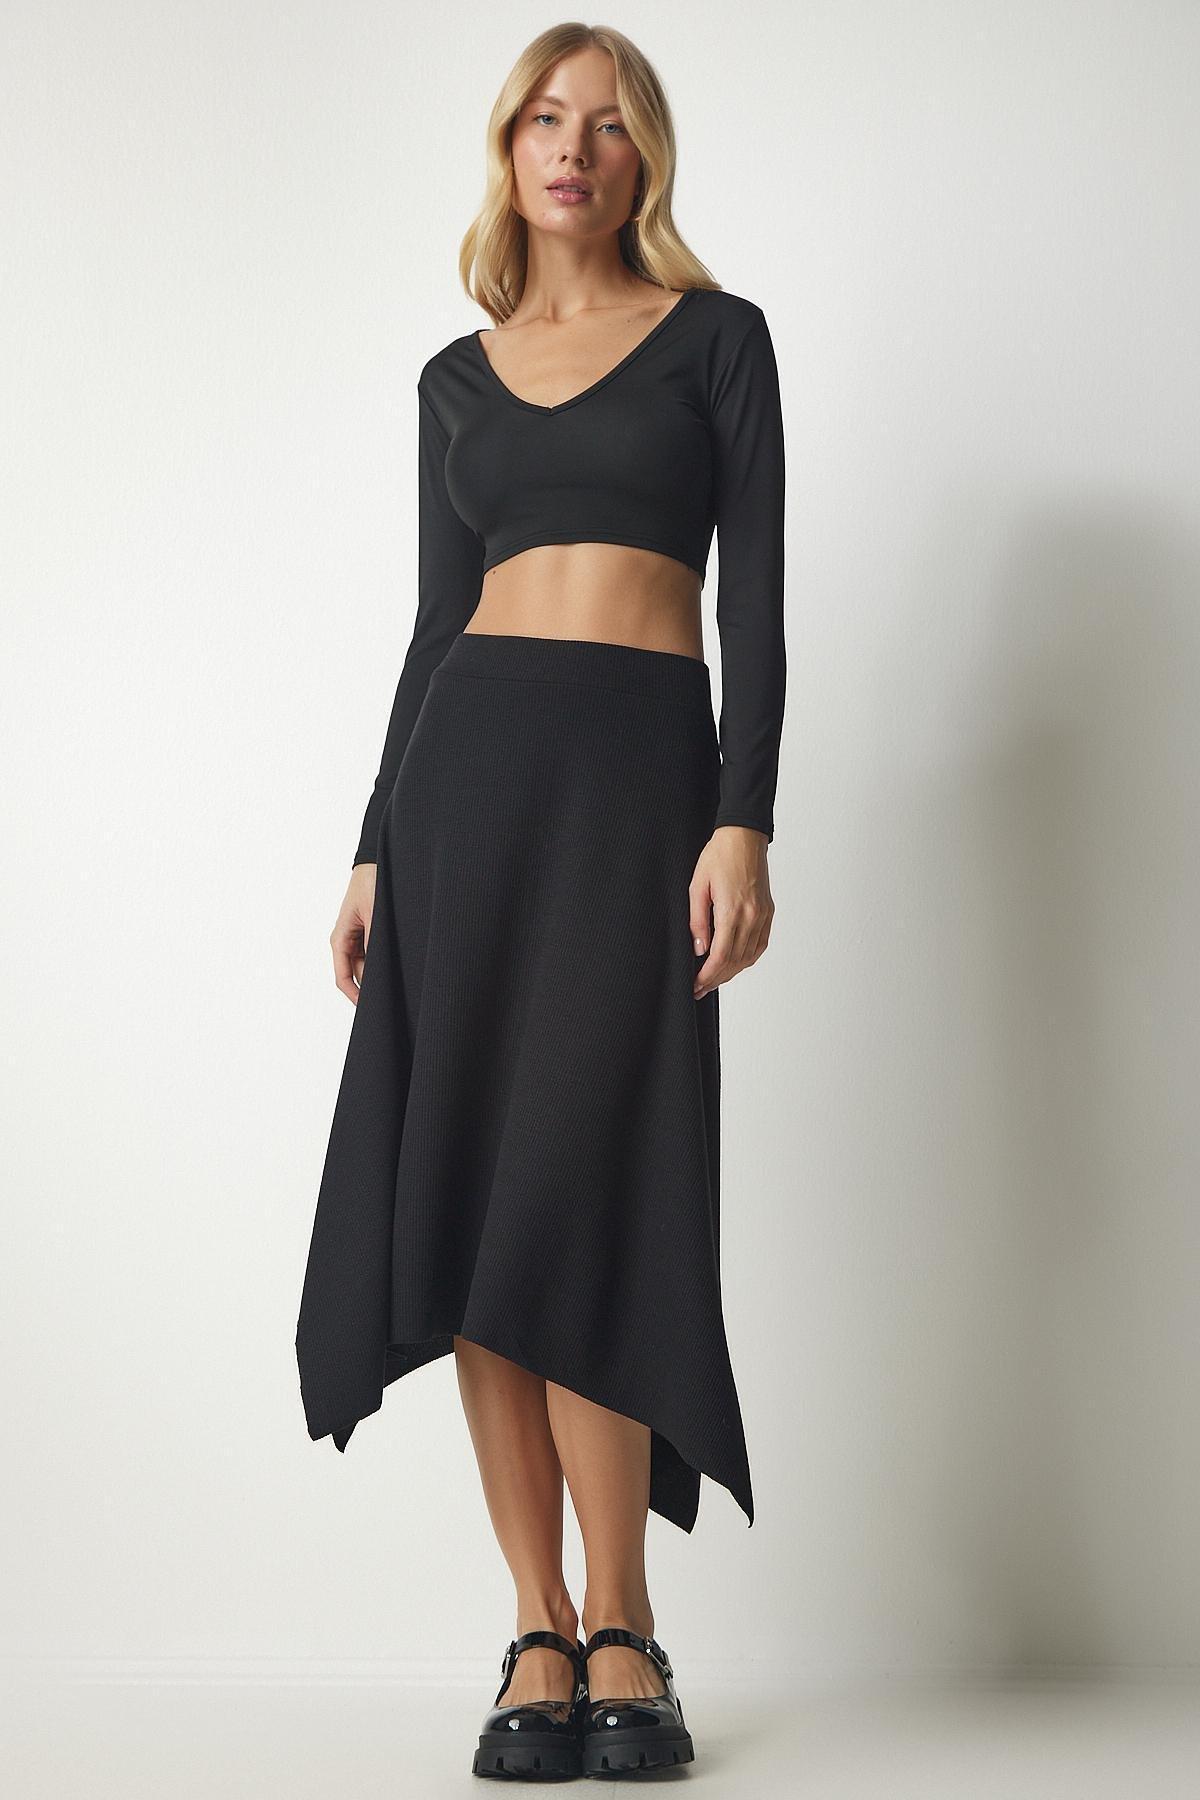 Happiness Istanbul - Black Asymmetrical Cut Corduroy Knitted Skirt